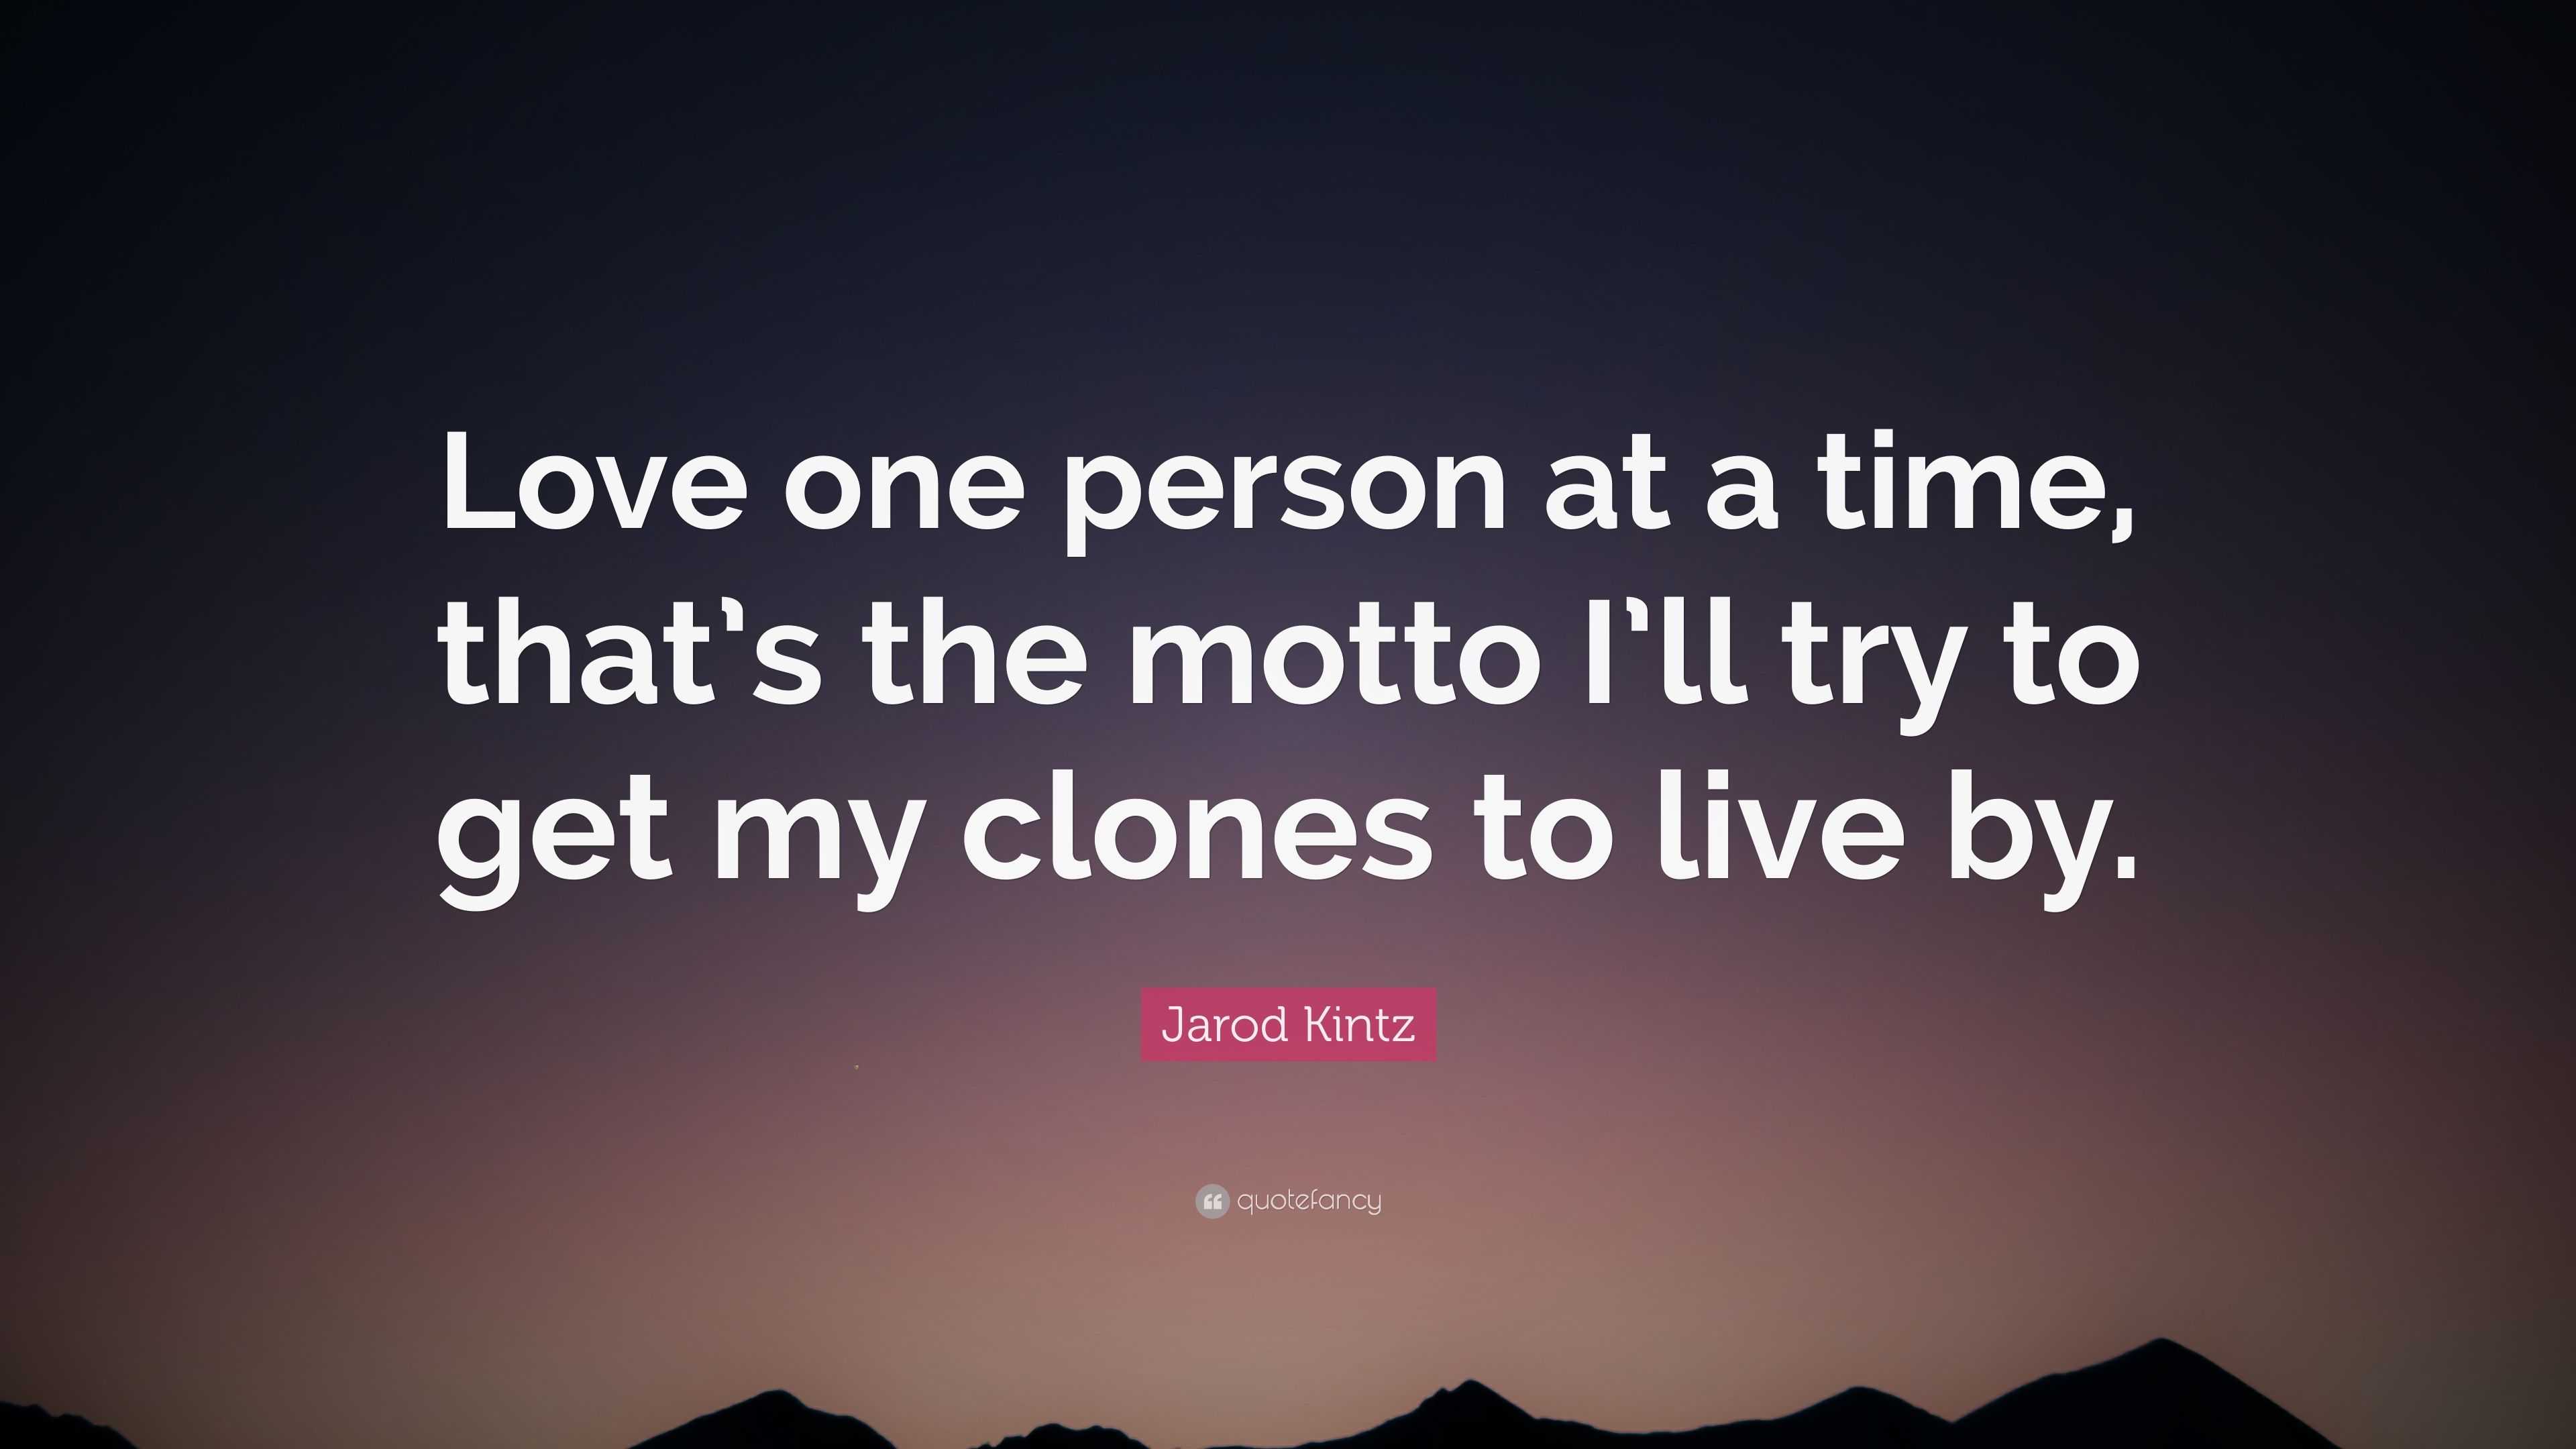 Jarod Kintz Quote “Love one person at a time that s the motto I